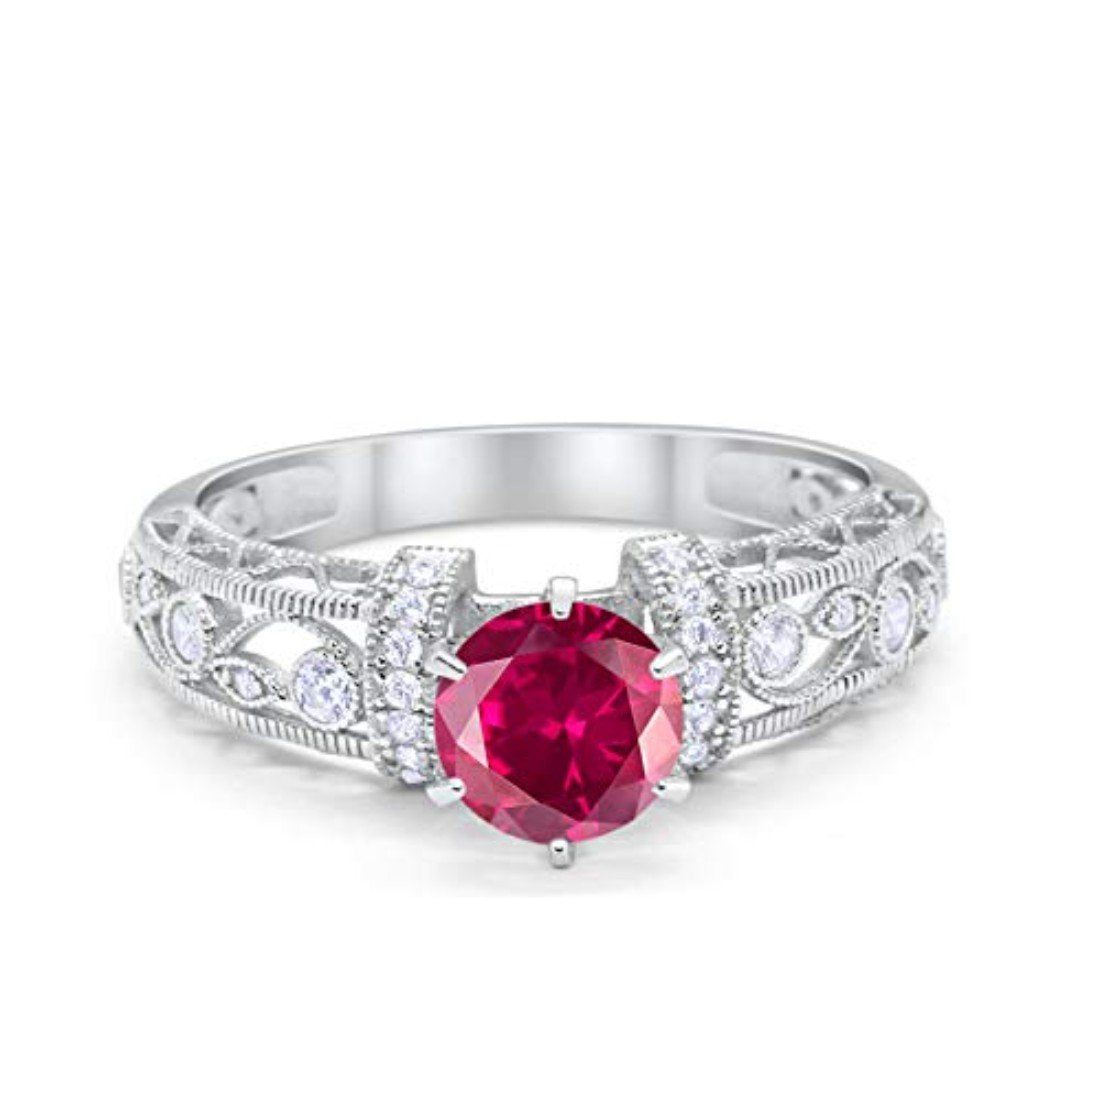 Art Deco Wedding Promise Ring Round Simulated Ruby CZ 925 Sterling Silver